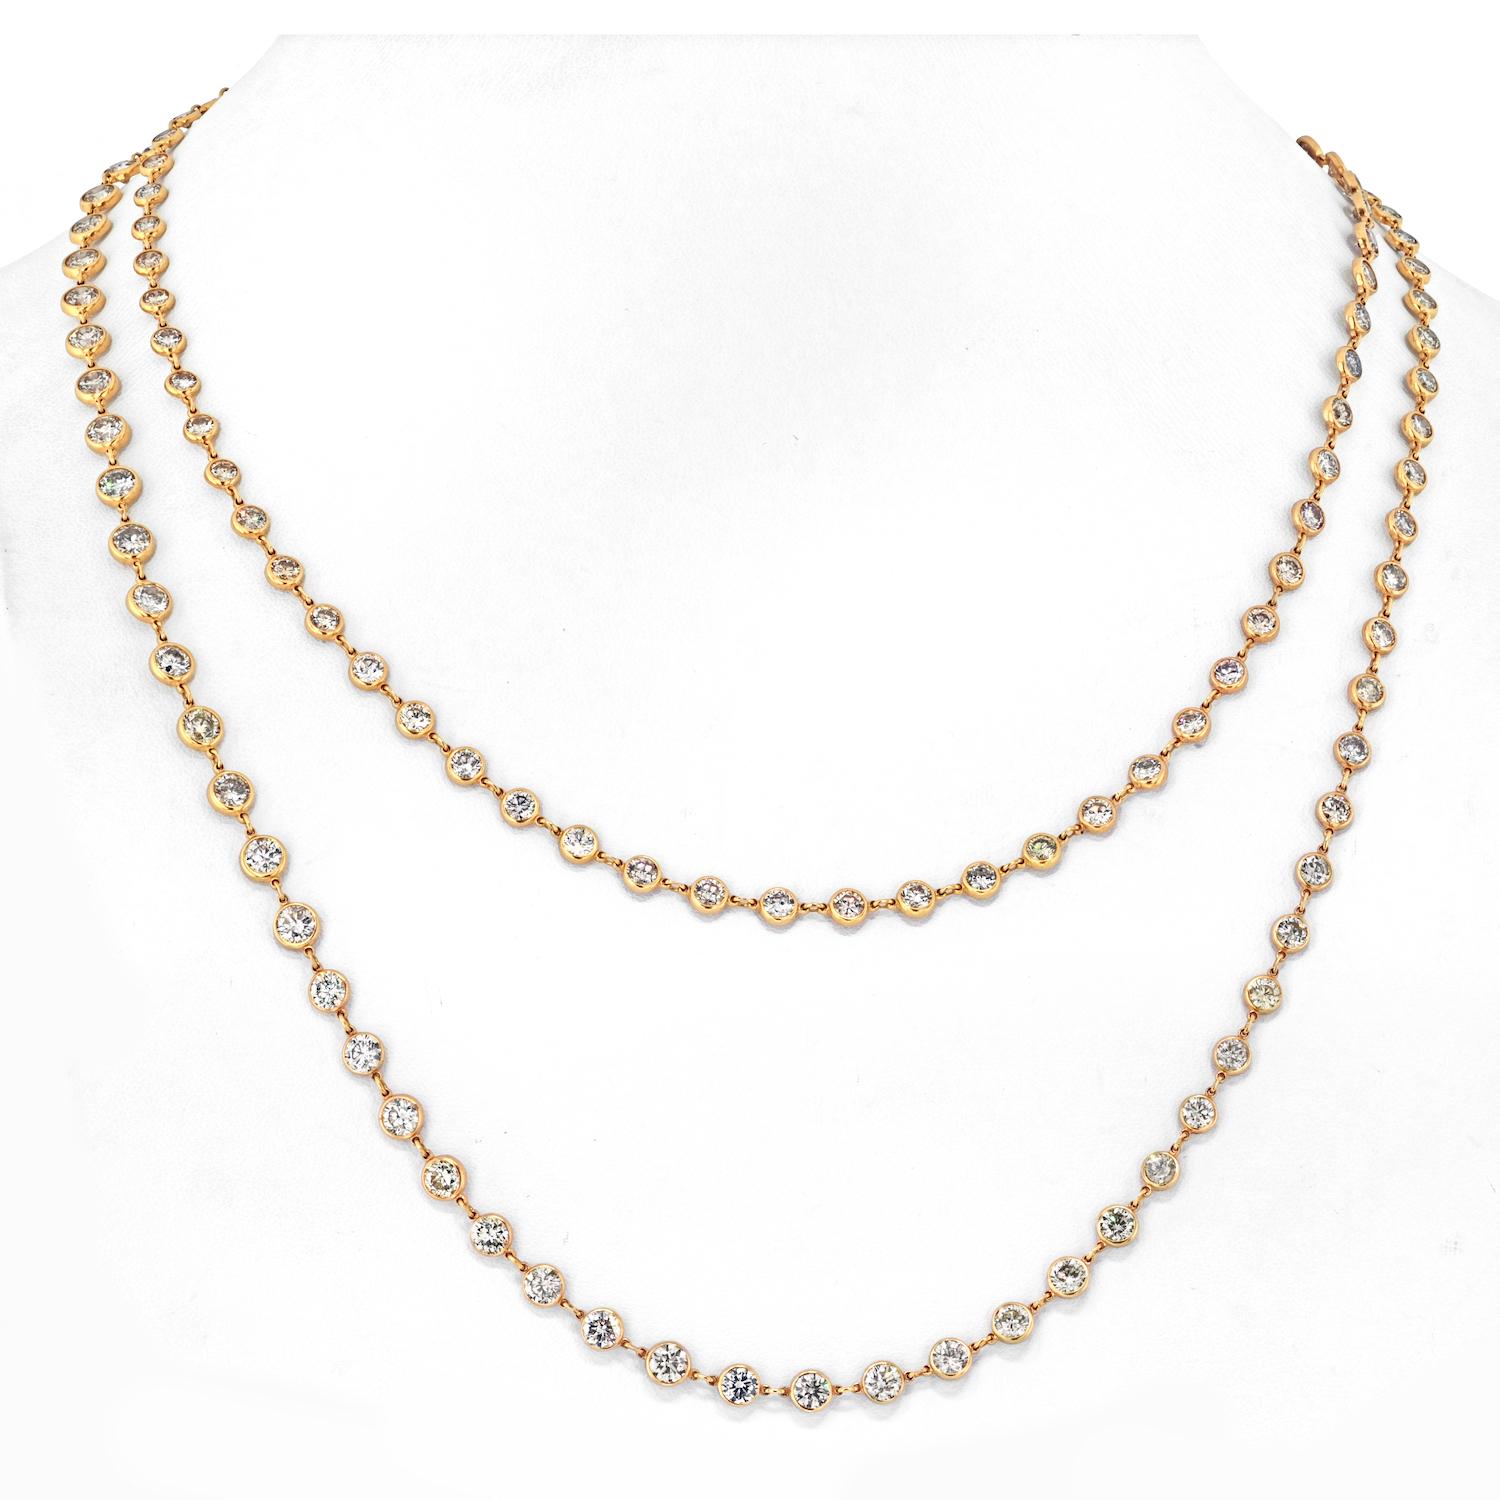 Introducing a truly enchanting piece of jewelry – the Beautiful Handmade Diamond by the Yard Necklace in 18K Yellow Gold. Immerse yourself in the luxurious allure of this meticulously crafted necklace, designed to grace your neckline with timeless